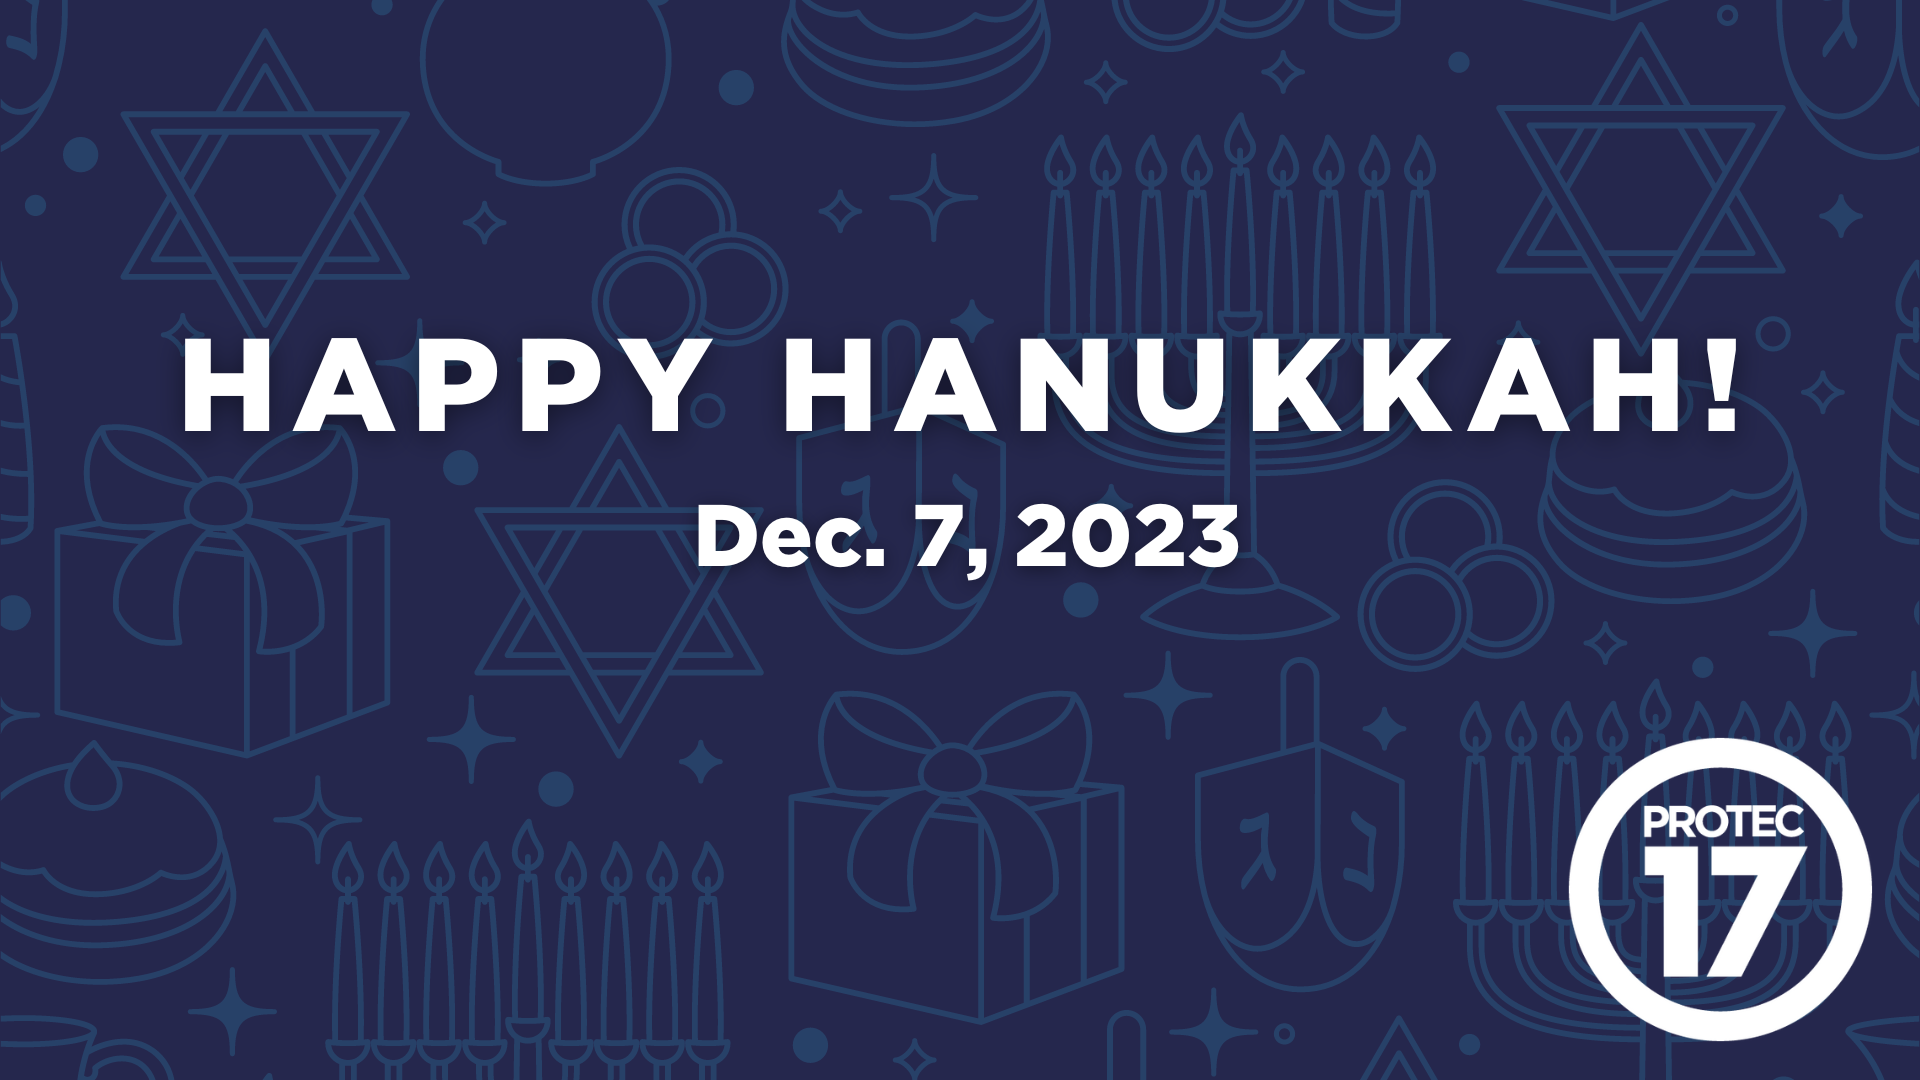 Text reads, "HAPPY HANUKKAH! | Dec. 7, 2023" There are faded, line illustrations of different celebratory Hanukkah items in the background.